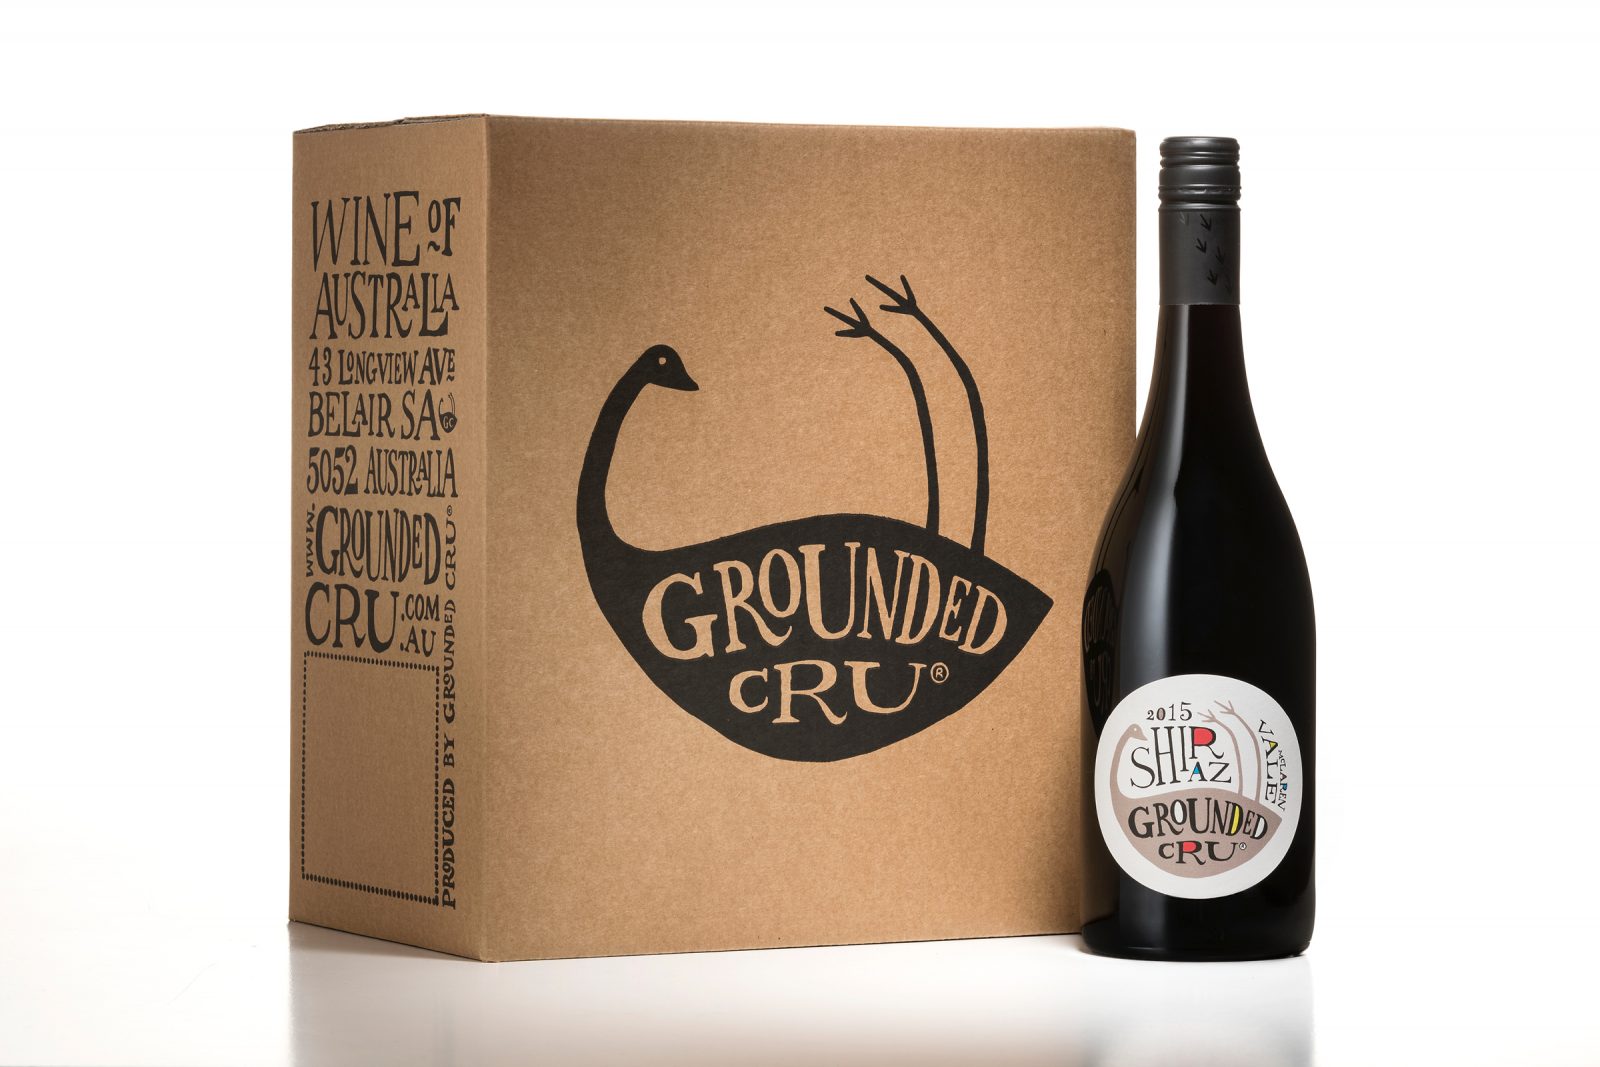 Down to Earth Australian Wine Brand and Packaging